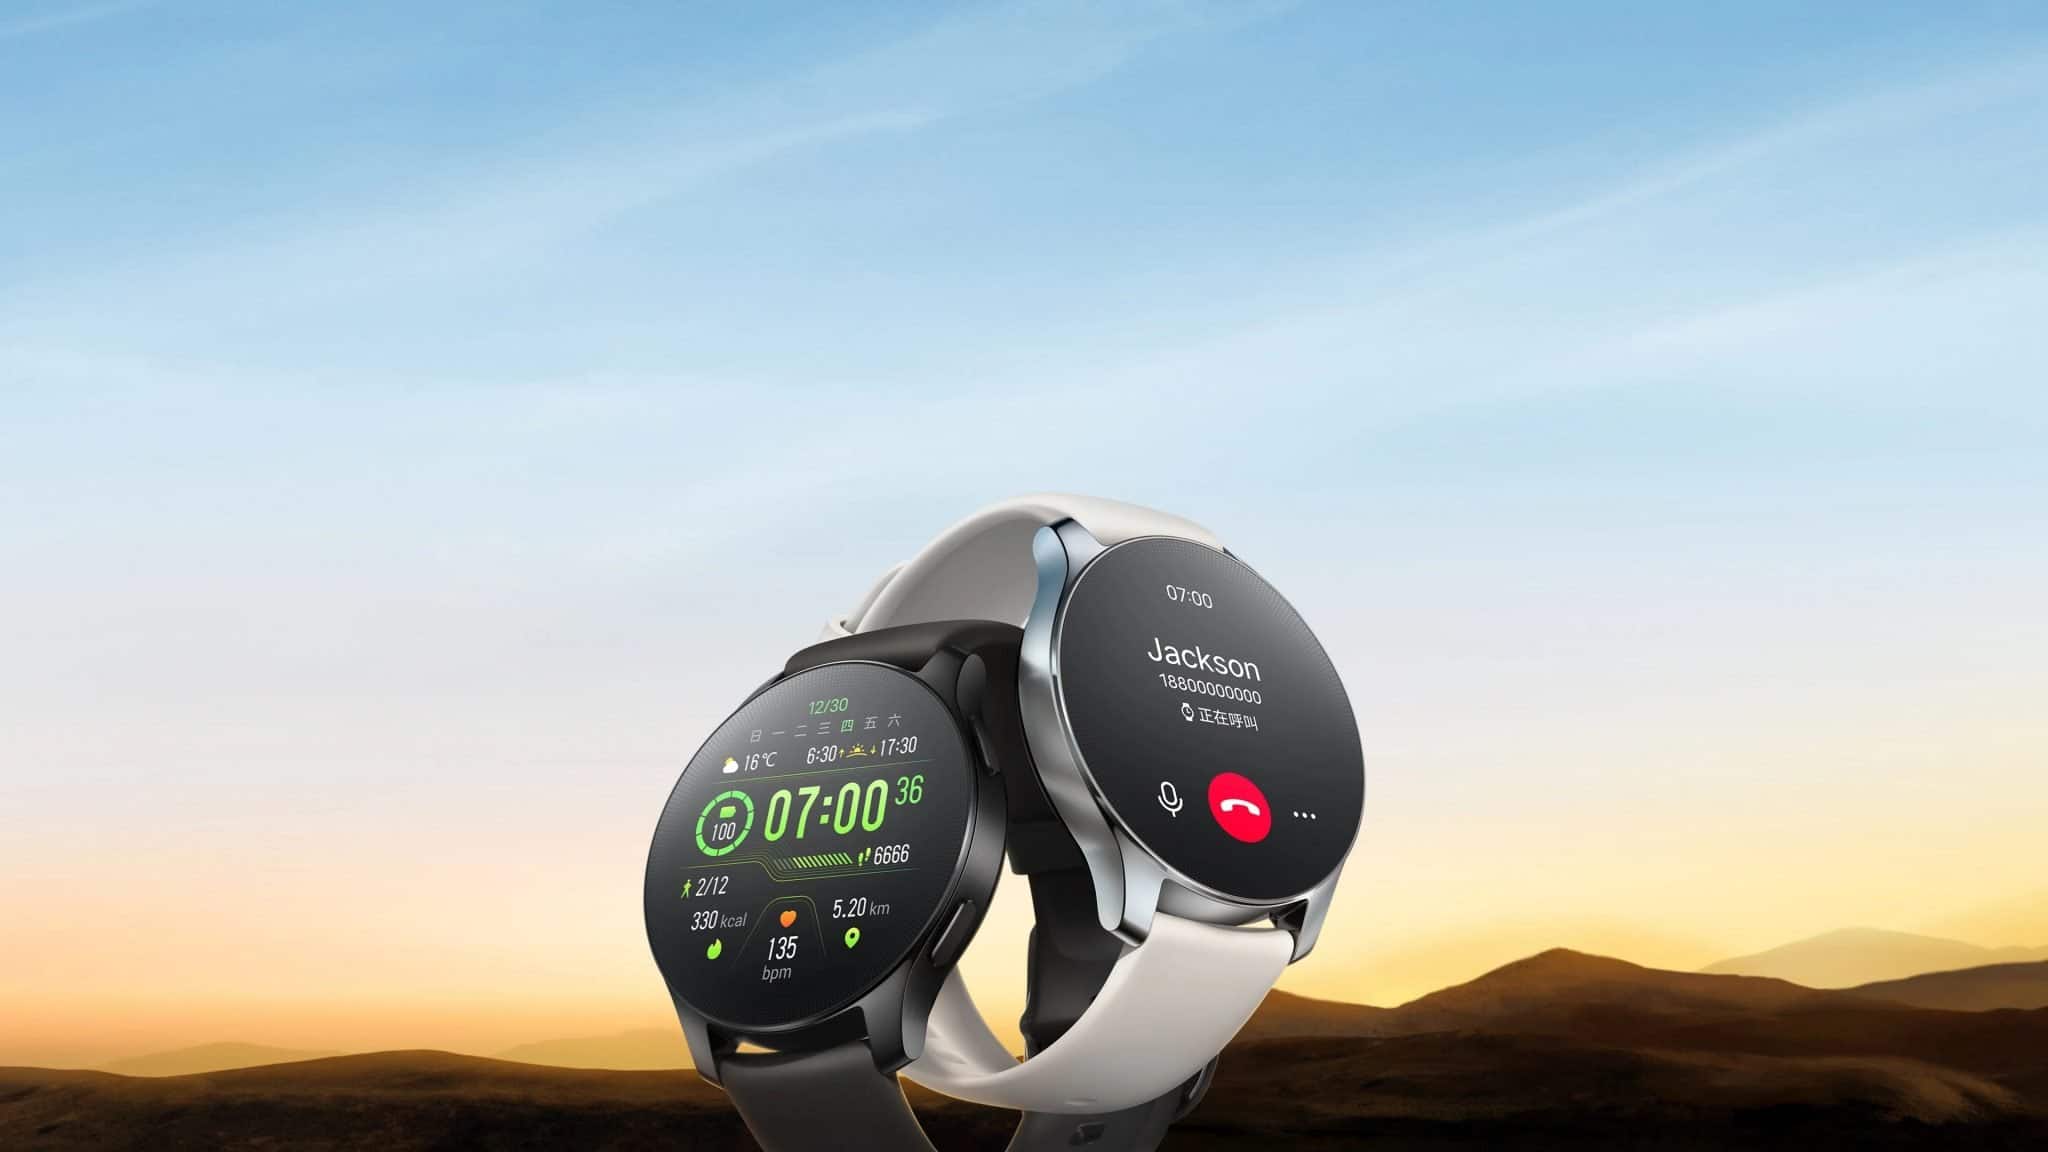 Vivo Watch 2 presented.  Long-lasting battery and eSIM on board